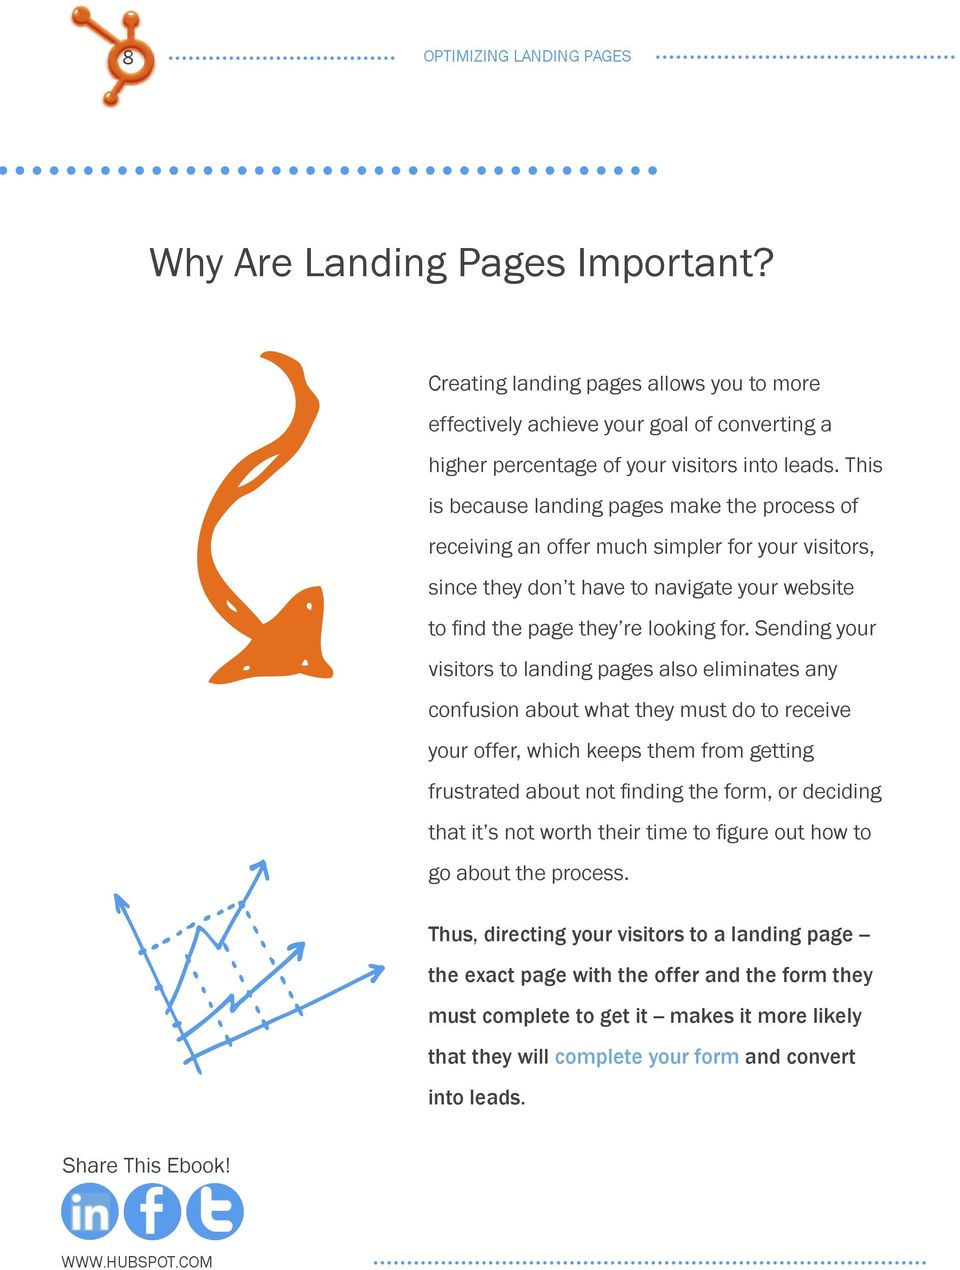 Sending your visitors to landing pages also eliminates any confusion about what they must do to receive your offer, which keeps them from getting frustrated about not finding the form, or deciding